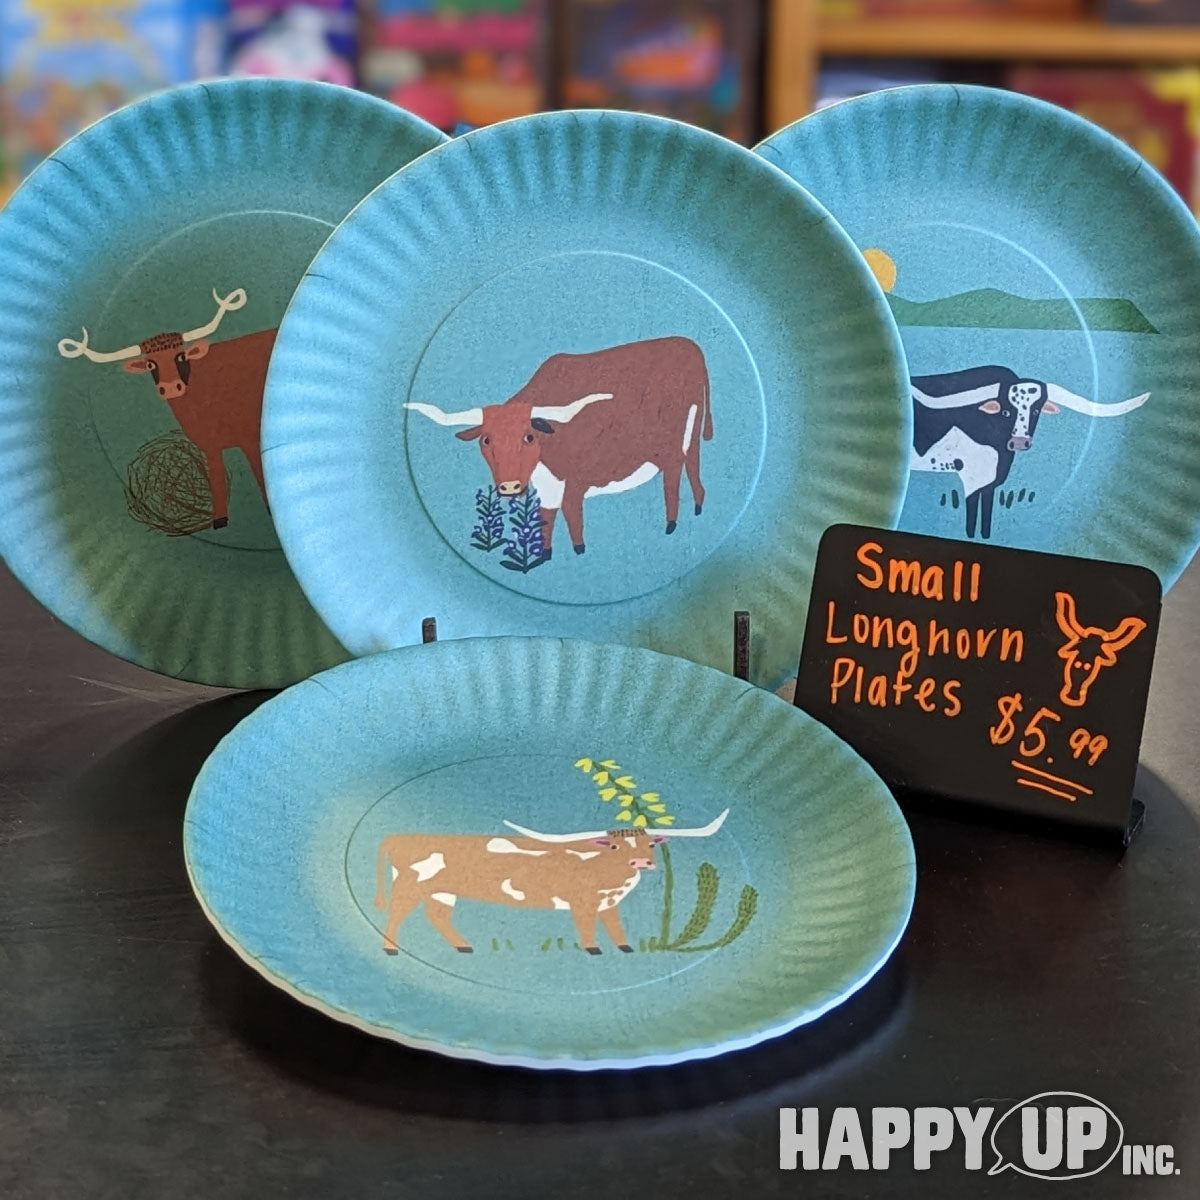 One Hundred 80 Degrees Farmhouse “Paper” Plates - In Store Only